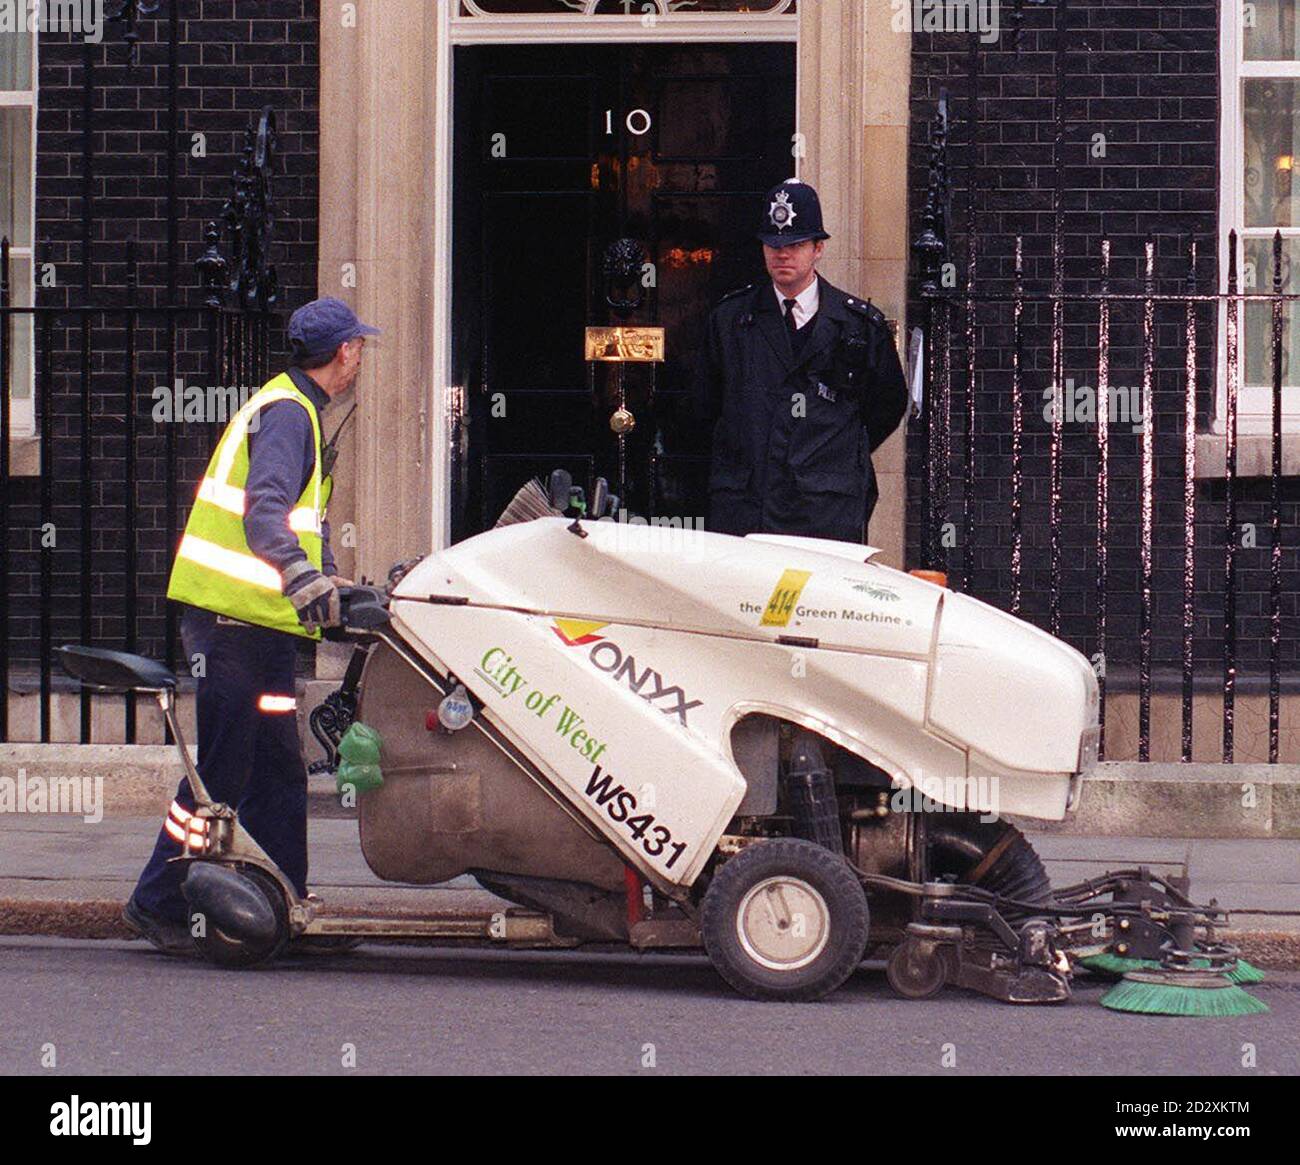 A road sweeper cleans up outside 10 Downing Street today (Thursday), following the Prime Minister's final Cabinet meeting before the General Election on May 1st. Photo by Sam Pearce. Stock Photo